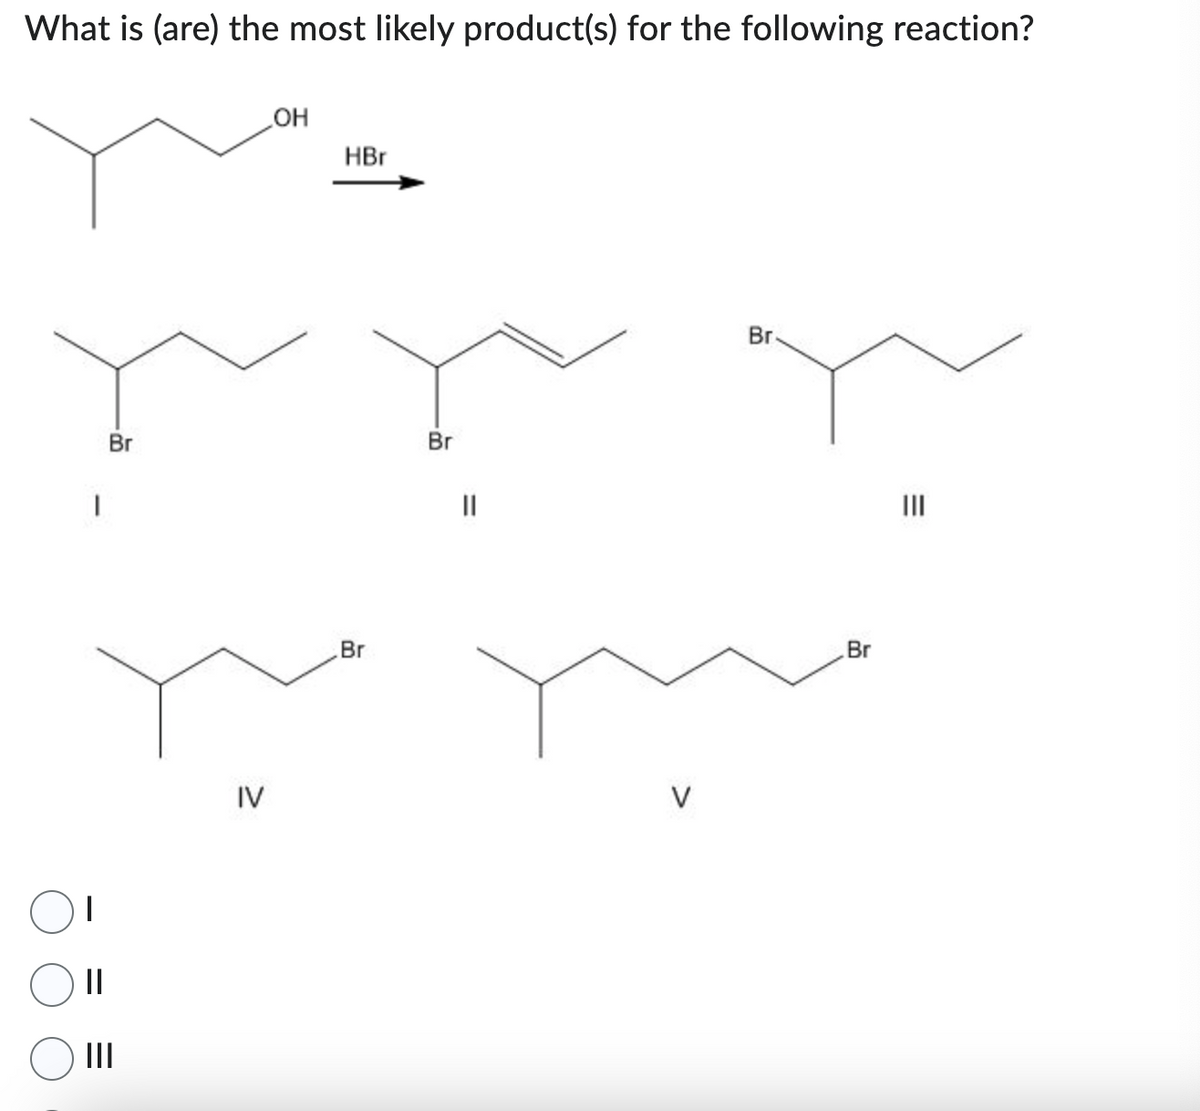 What is (are) the most likely product(s) for the following reaction?
I
||
Br
|||
IV
OH
HBr
Br
Br
||
V
Br.
Br
|||